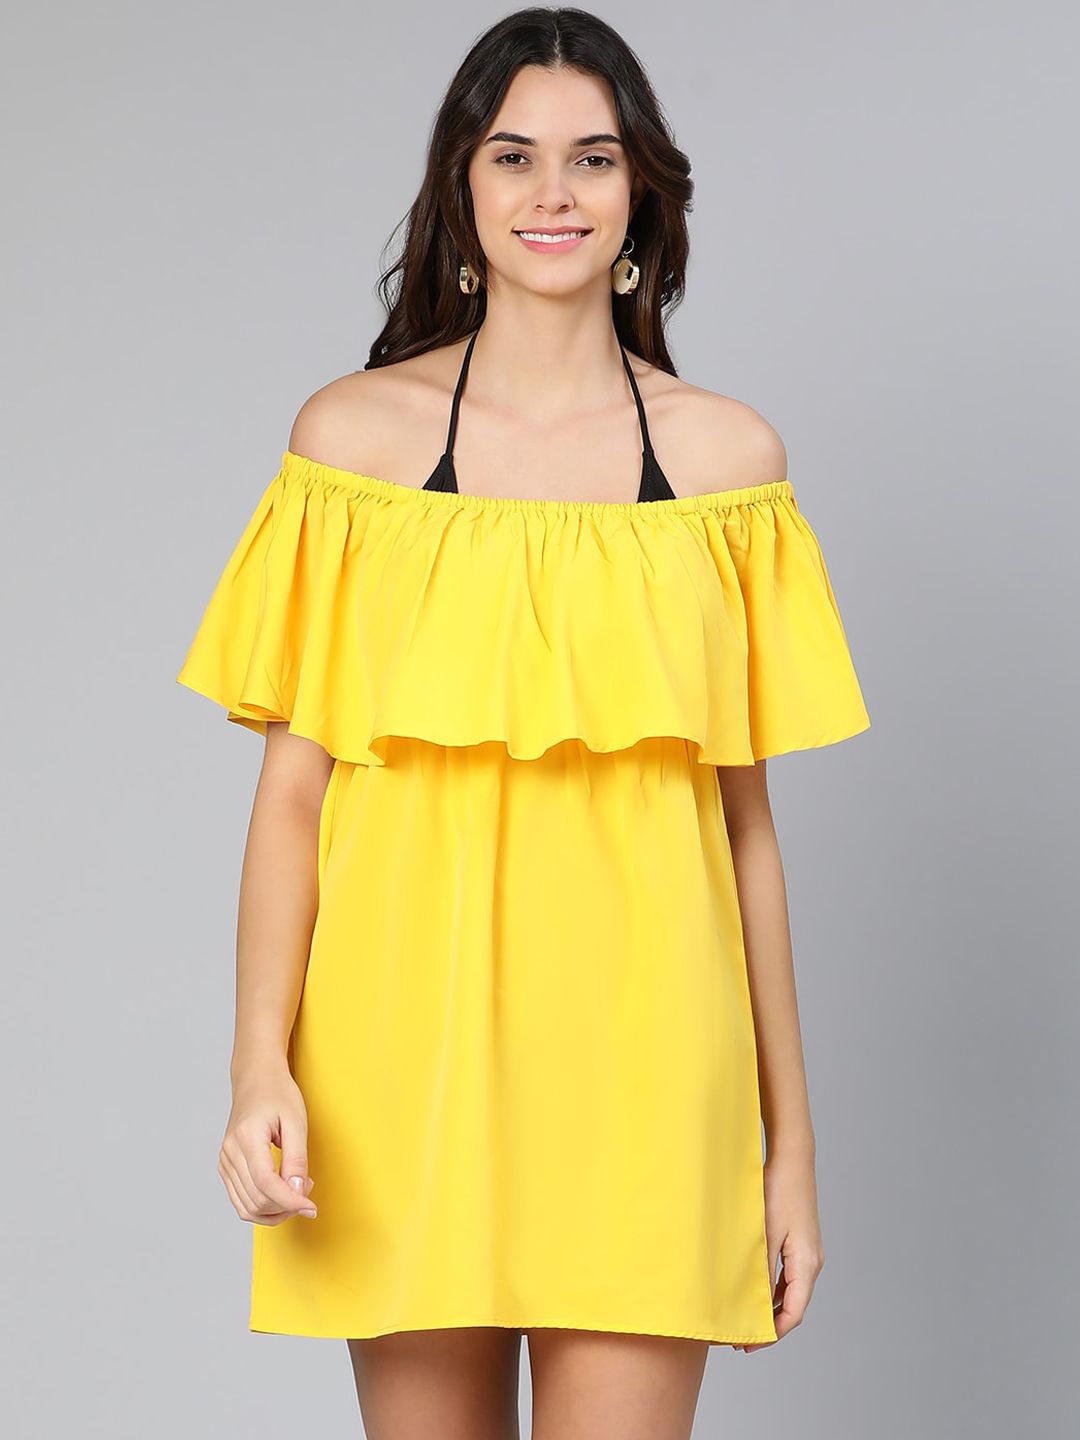 Oxolloxo Women Yellow Solid Cotton Off-Shoulder Swimwear Price in India